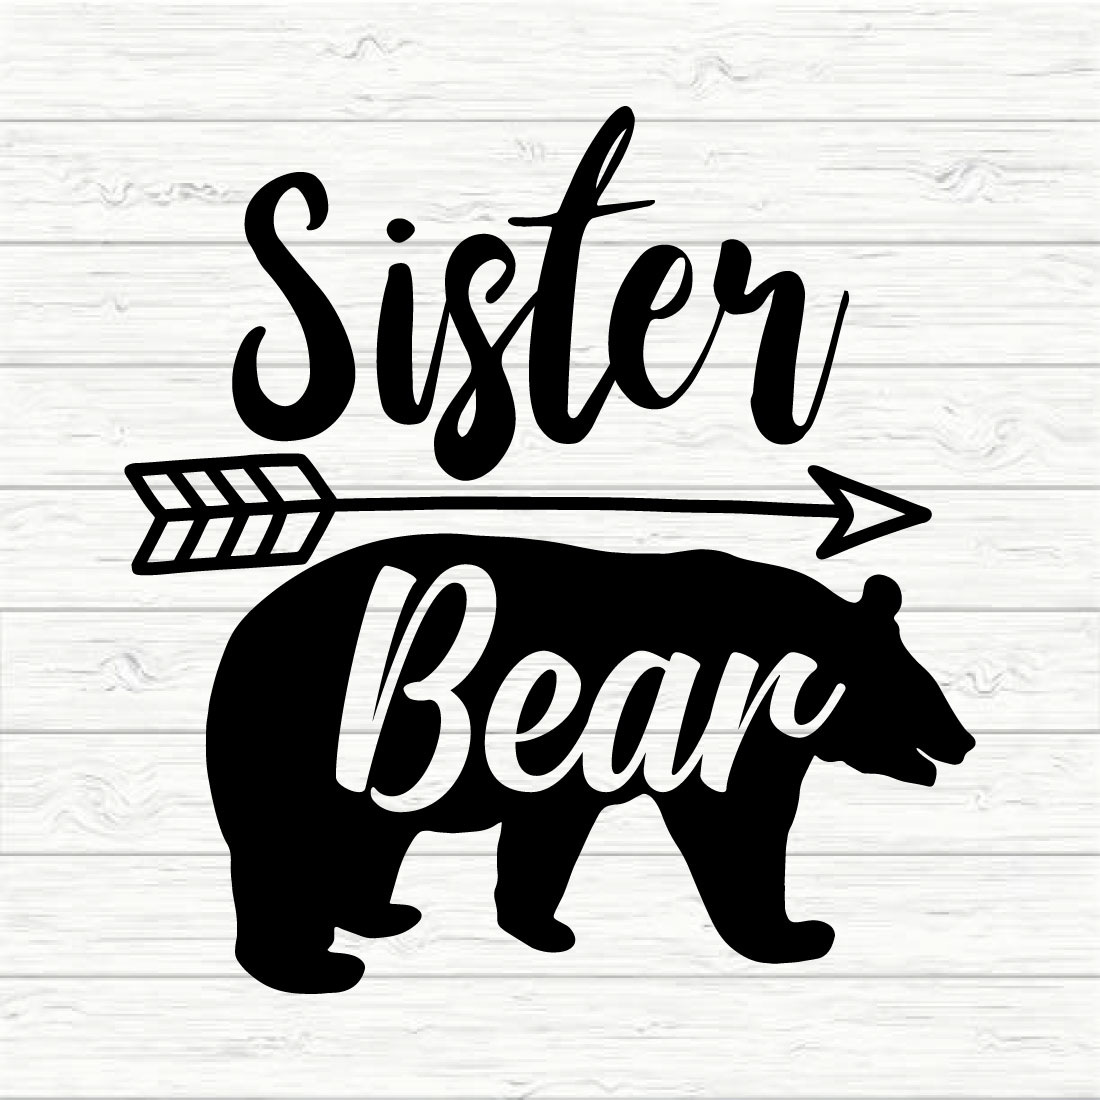 Sister Bear preview image.